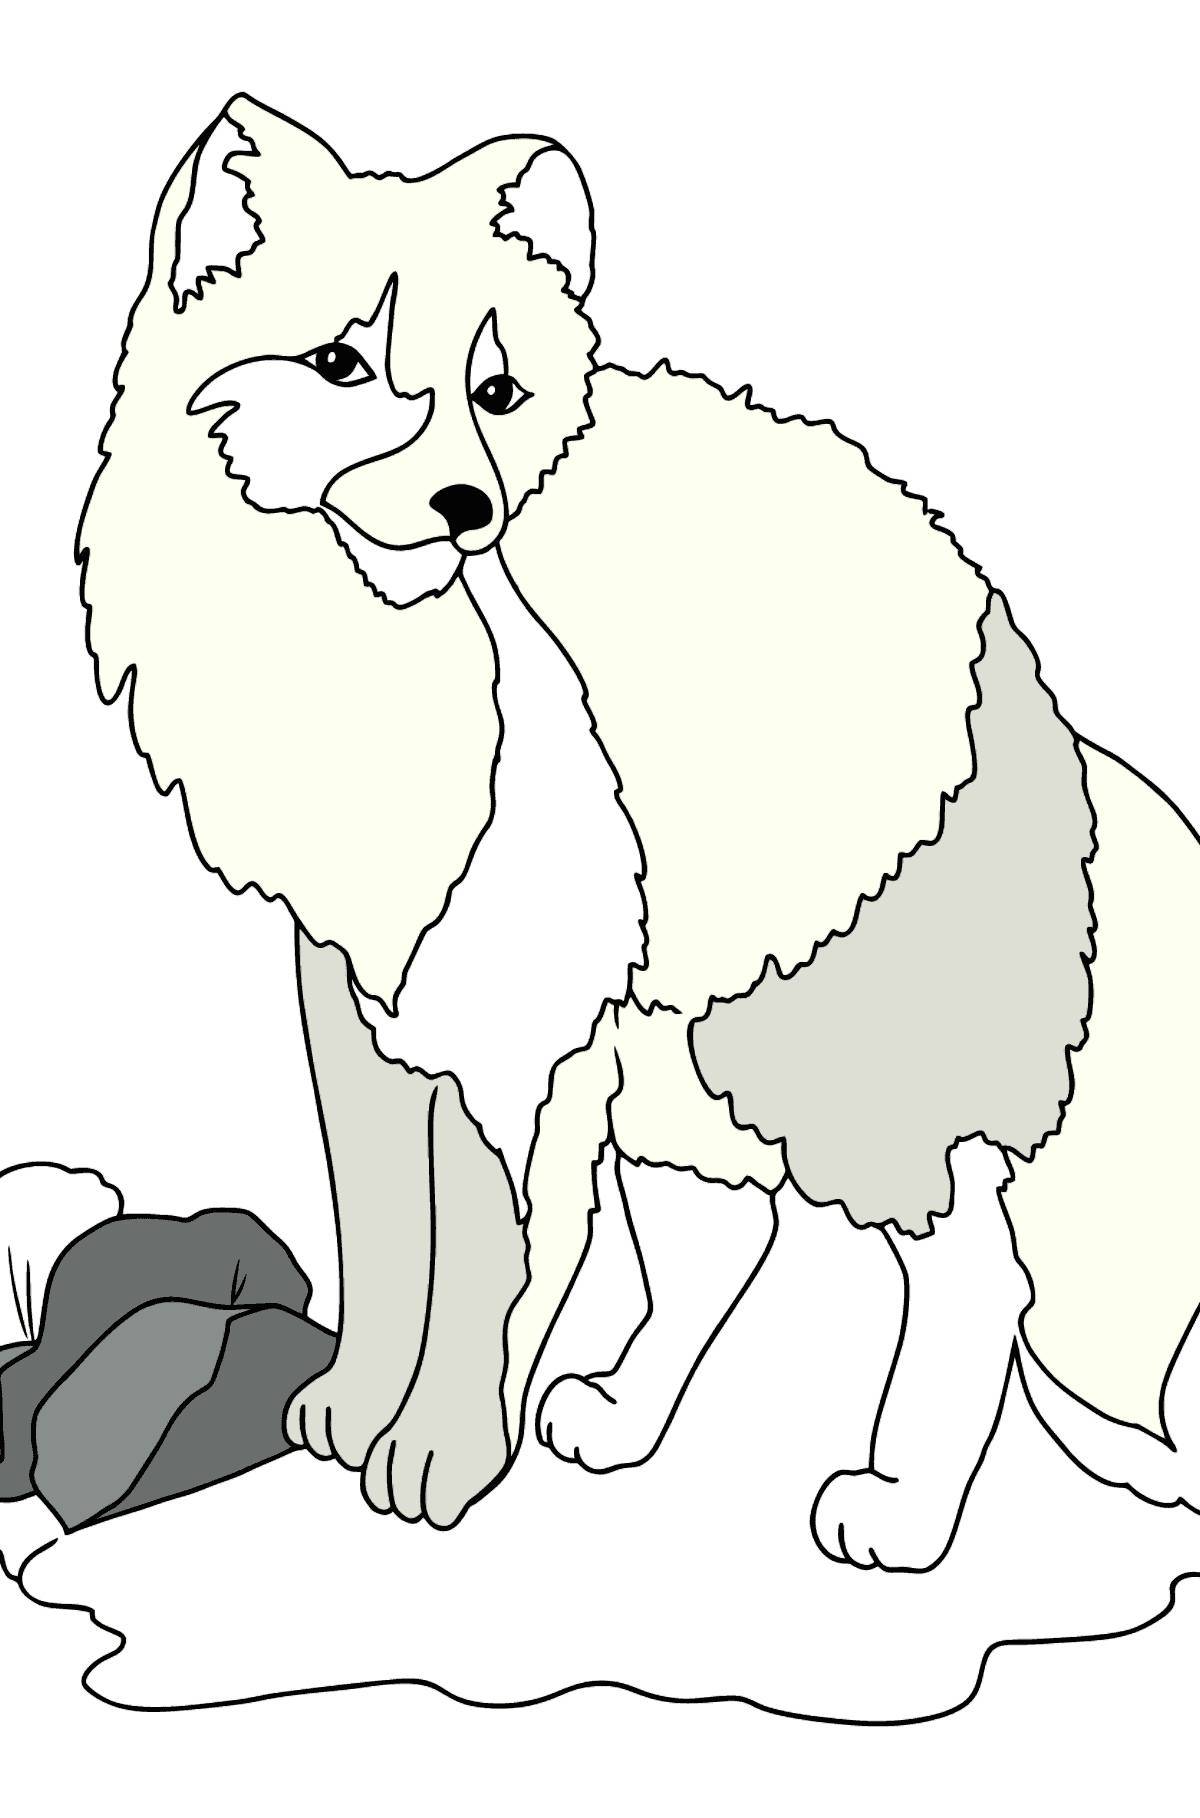 Coloring Page - A Polar or an Arctic Fox - Coloring Pages for Kids